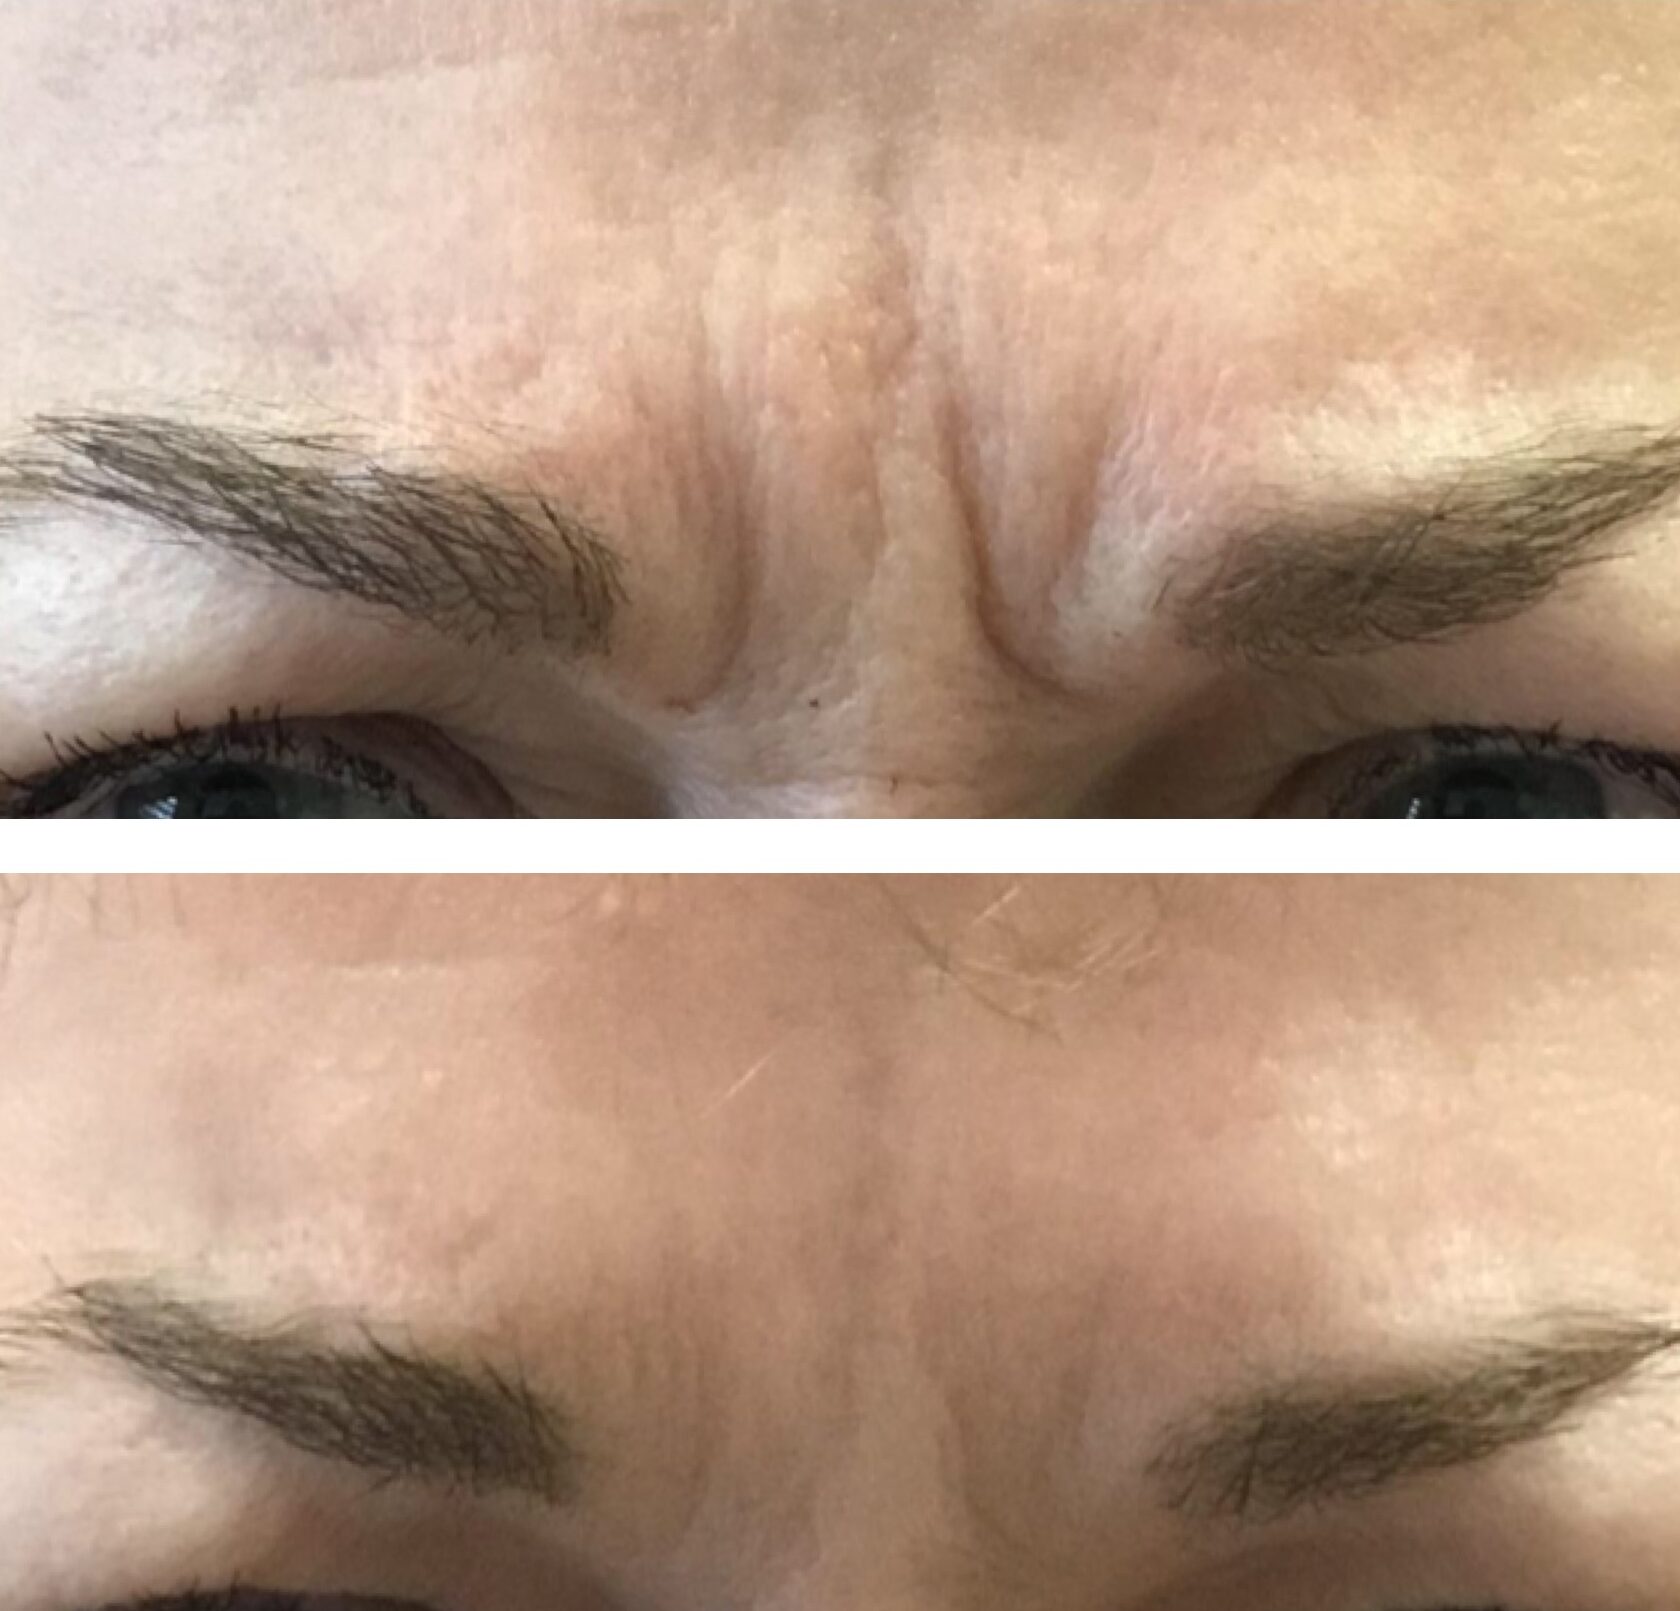 20 units of neurotoxin to treat frown lines between the eyebrows